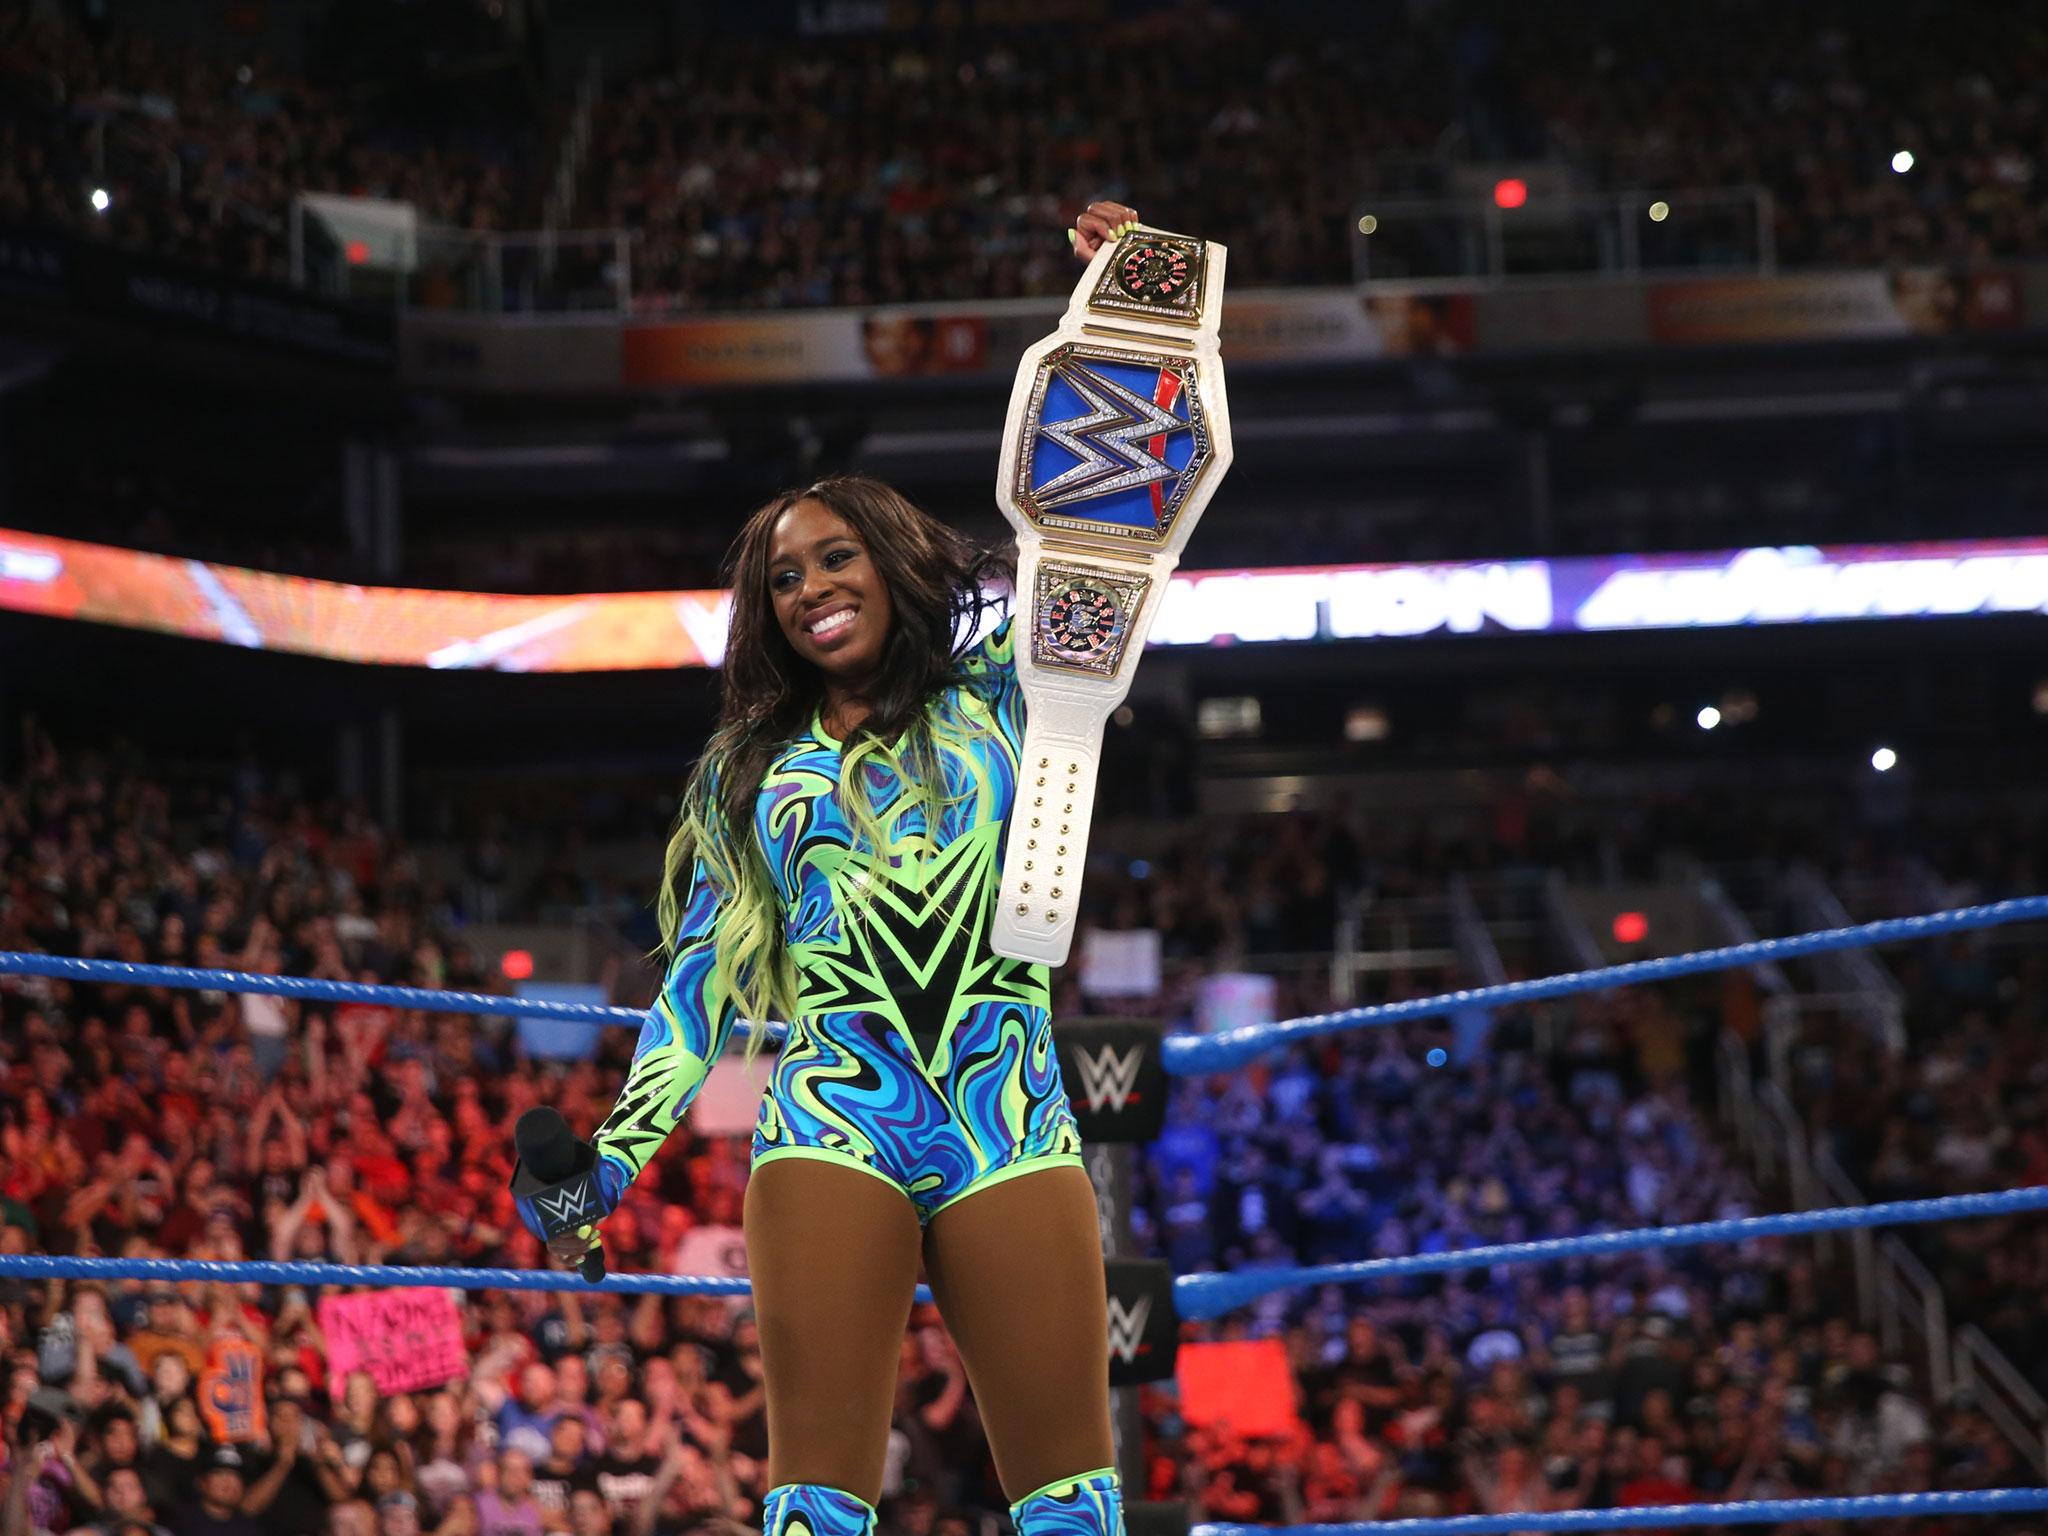 Naomi captured her first WWE title at Elimination Chamber by defeating Alexa Bliss